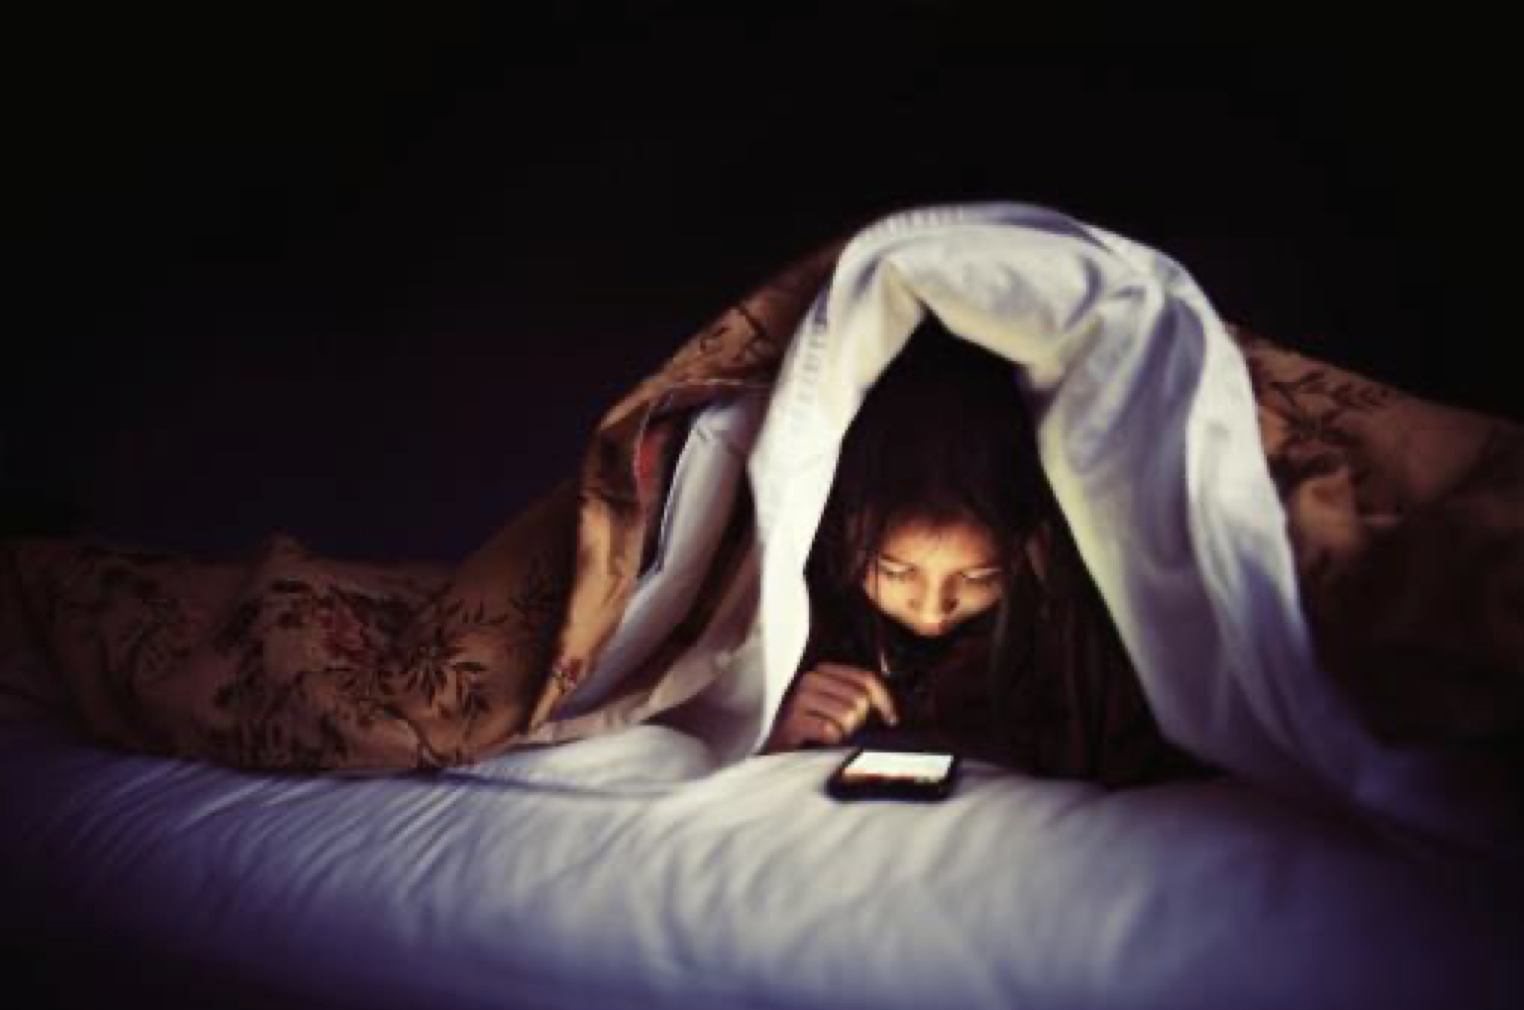 Child reading mobile device under blanket at night